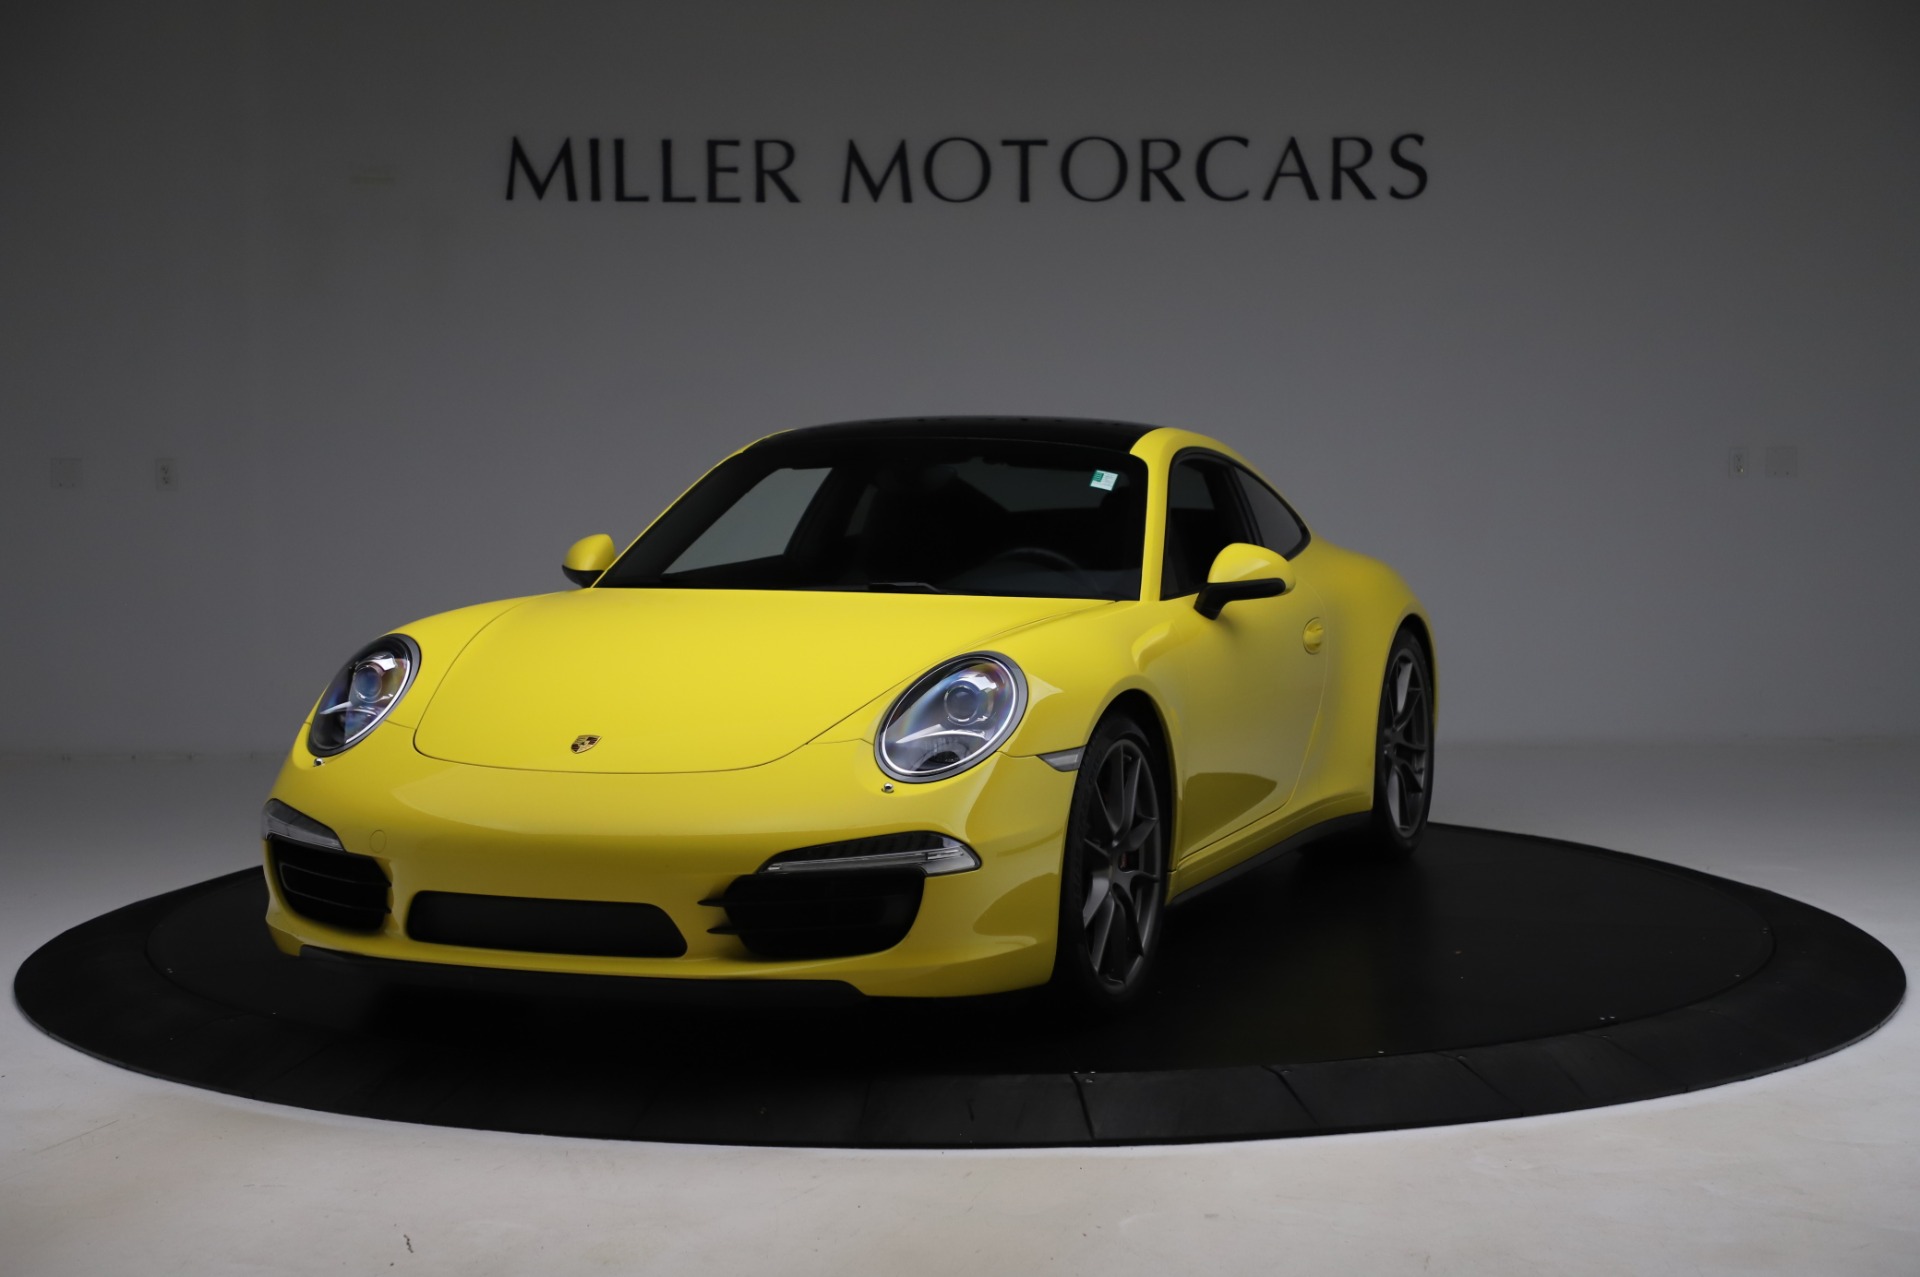 Used 2013 Porsche 911 Carrera 4S for sale Sold at Aston Martin of Greenwich in Greenwich CT 06830 1